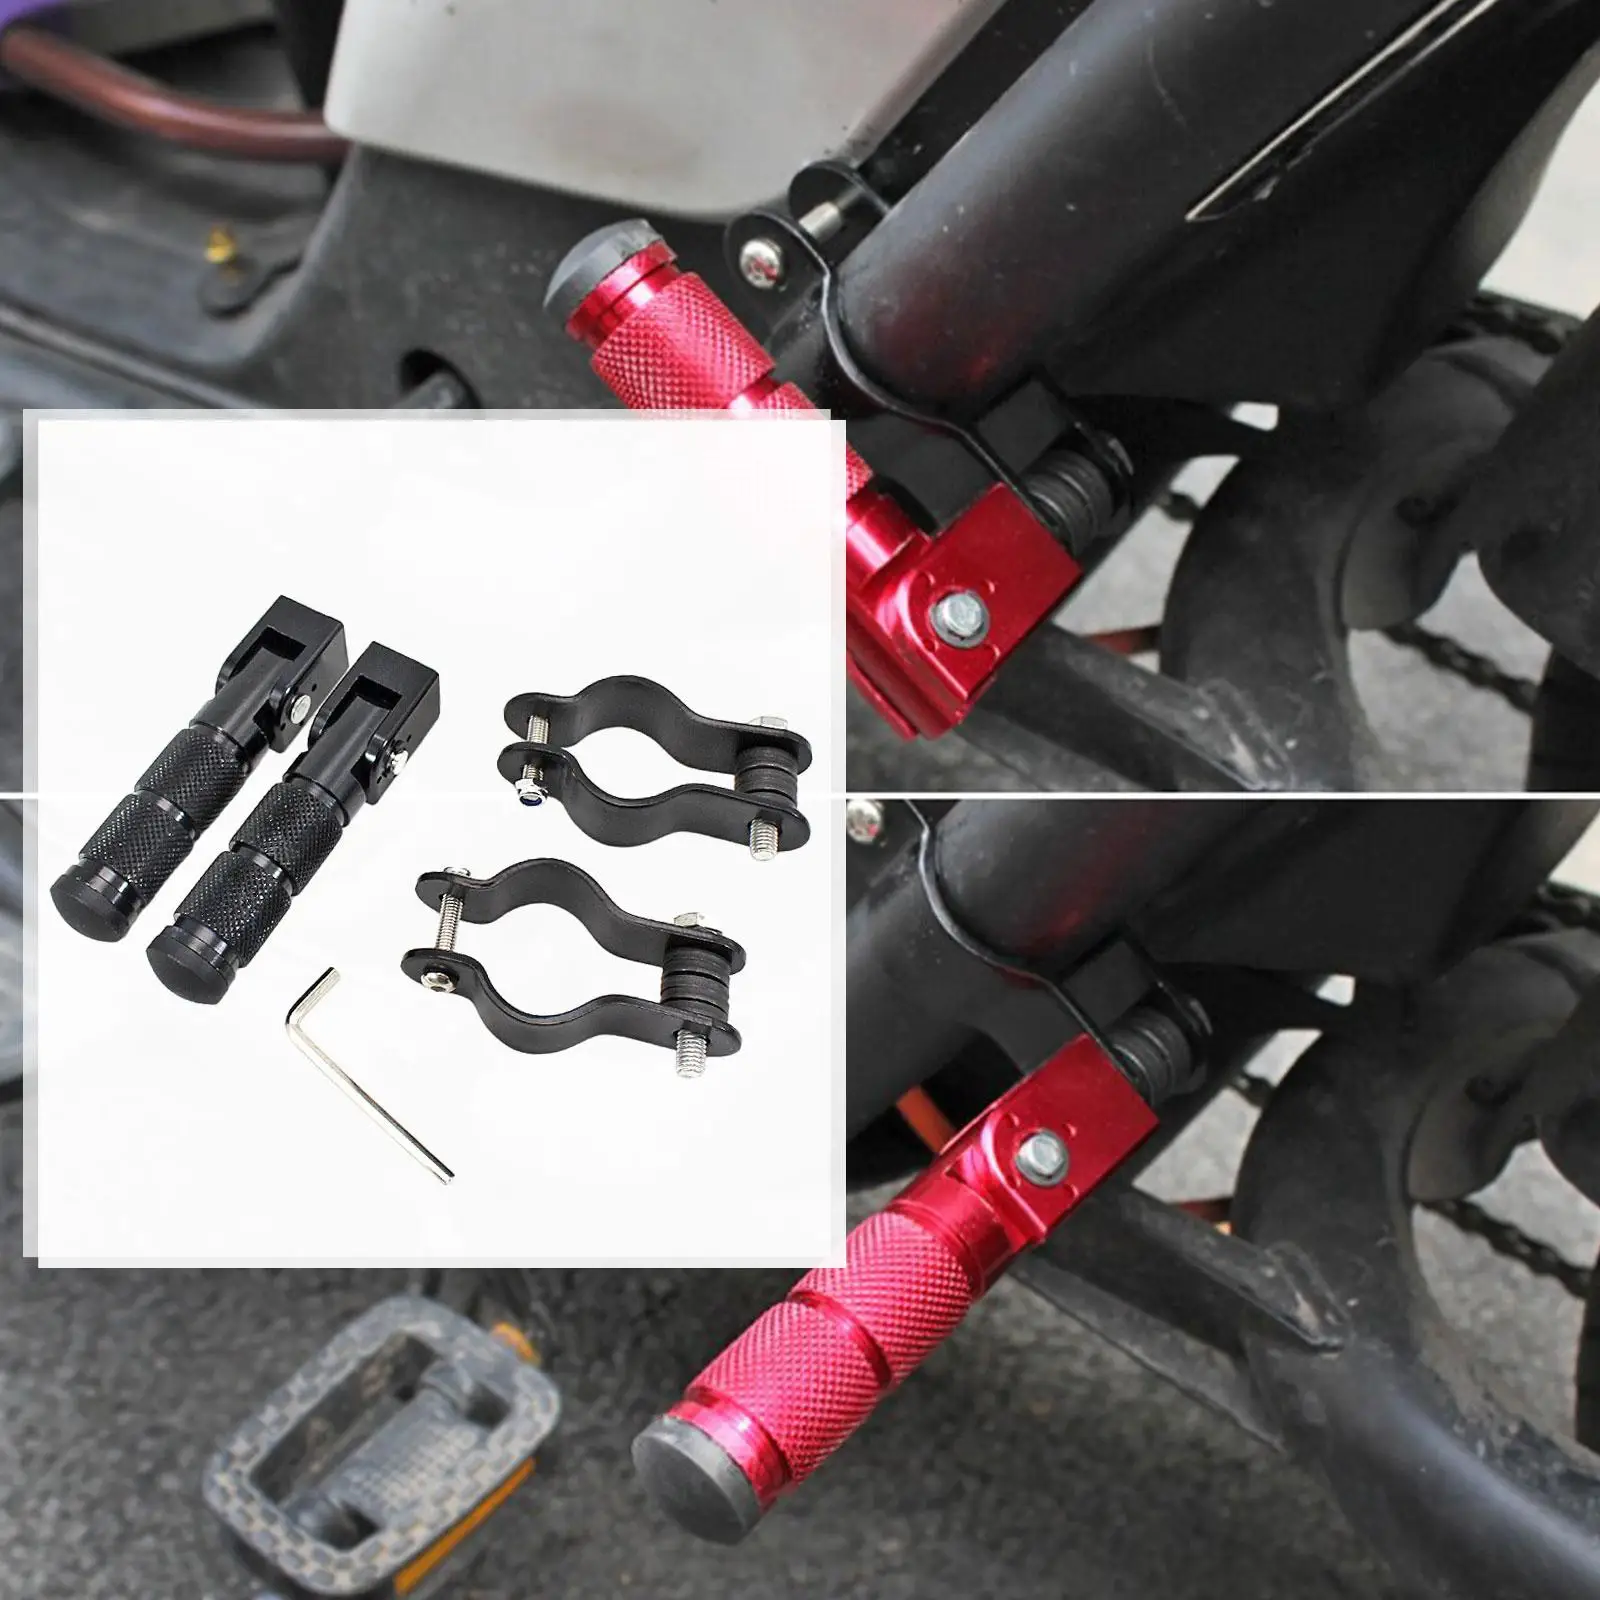 Universal Foot Pegs Folded NSkid Footpeg Rear Pedals for Motorbikes Dirt